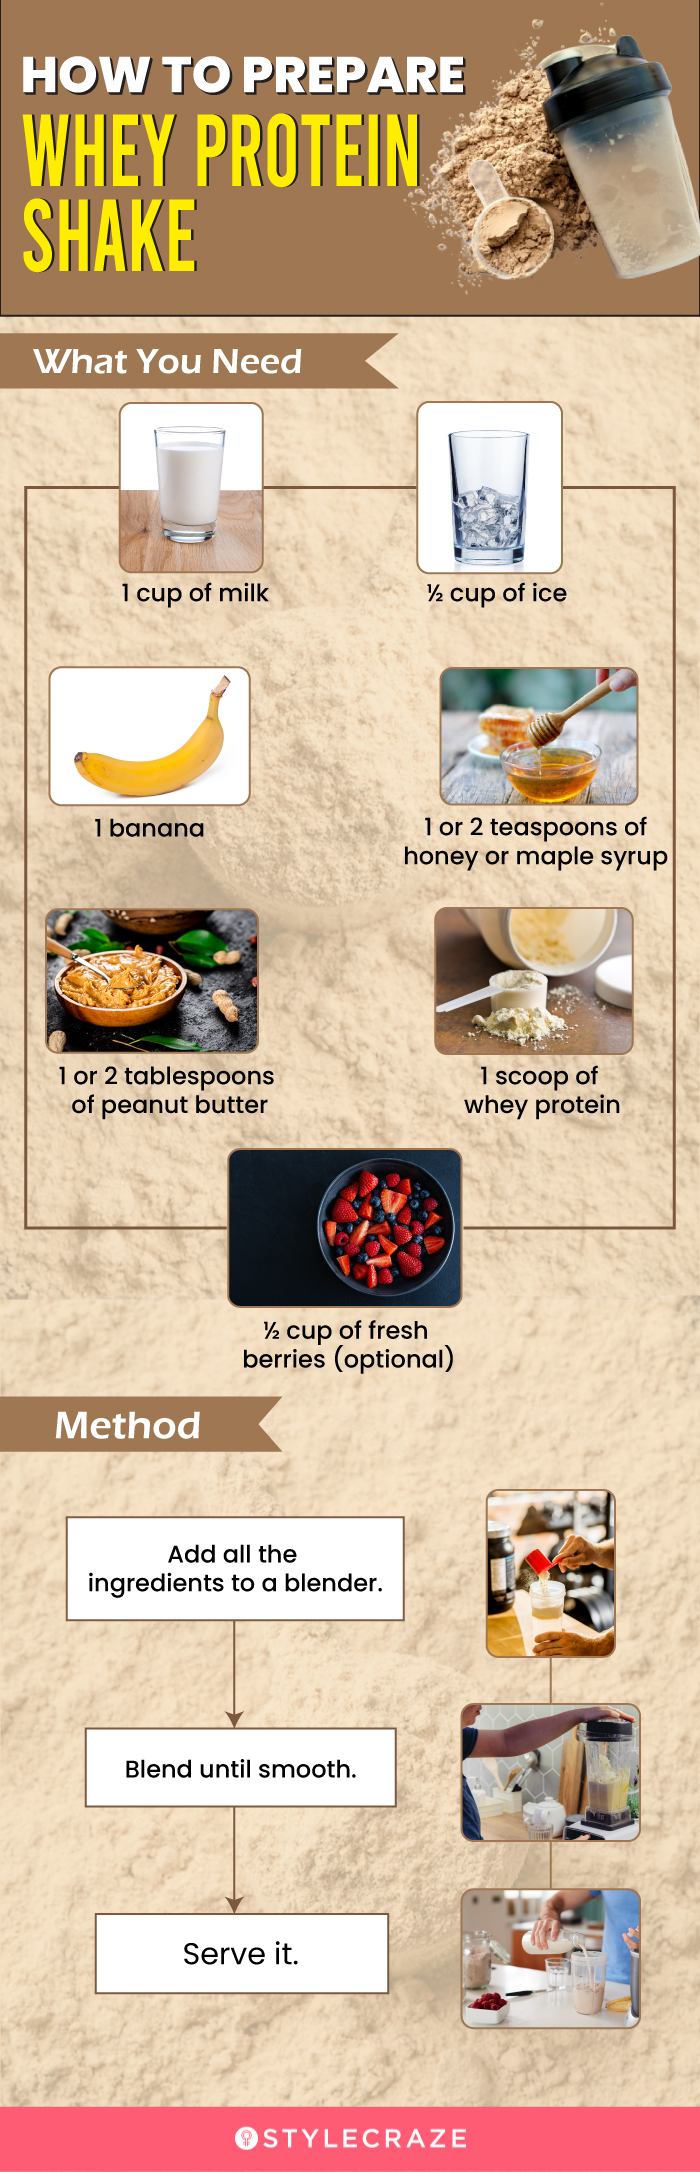 how to prepare whey protein shake [infographic]